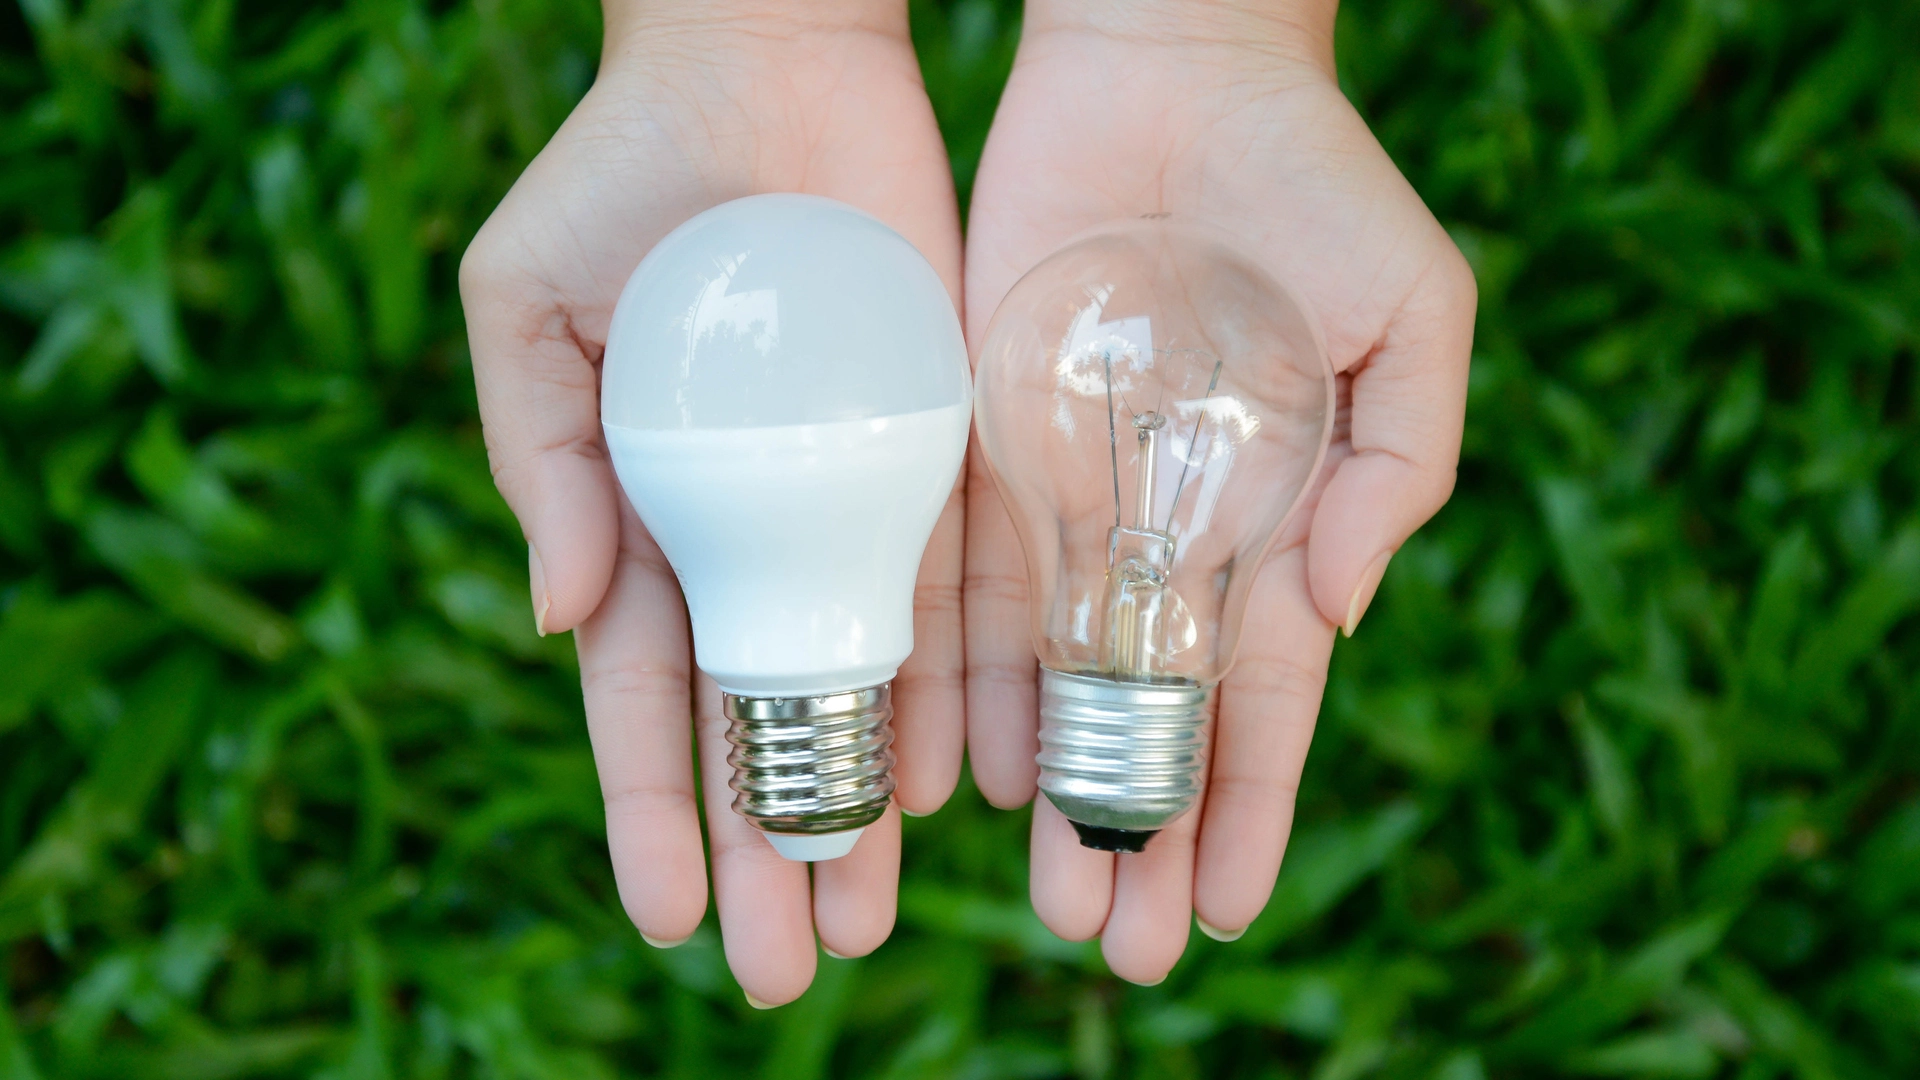 What’s Better for Outdoor Lighting - Incandescent or LED Bulbs?